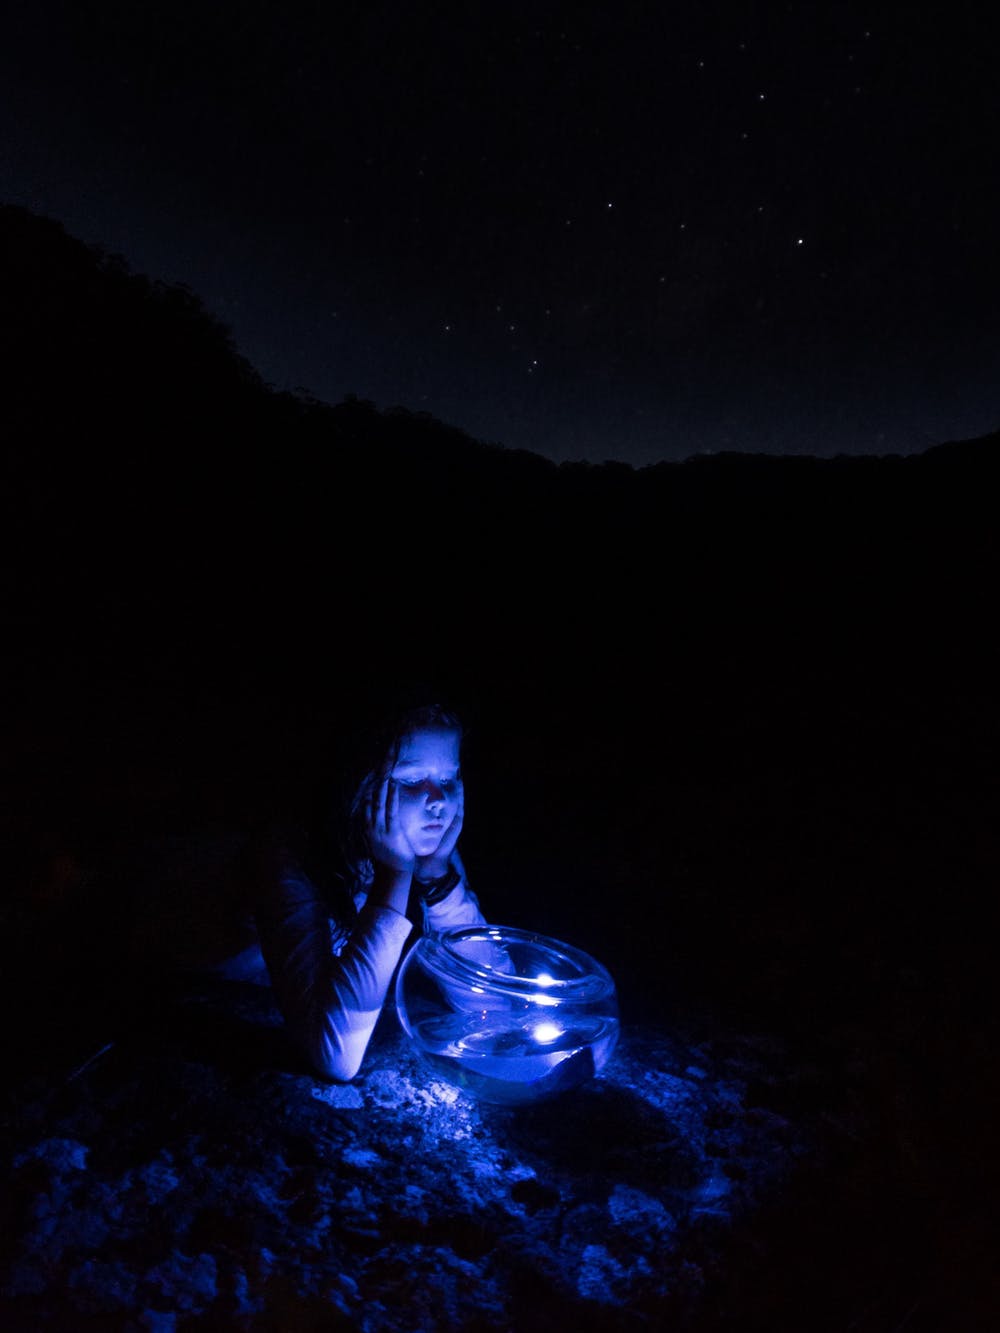 A young girl looks into a glass bowl on a mossy rock